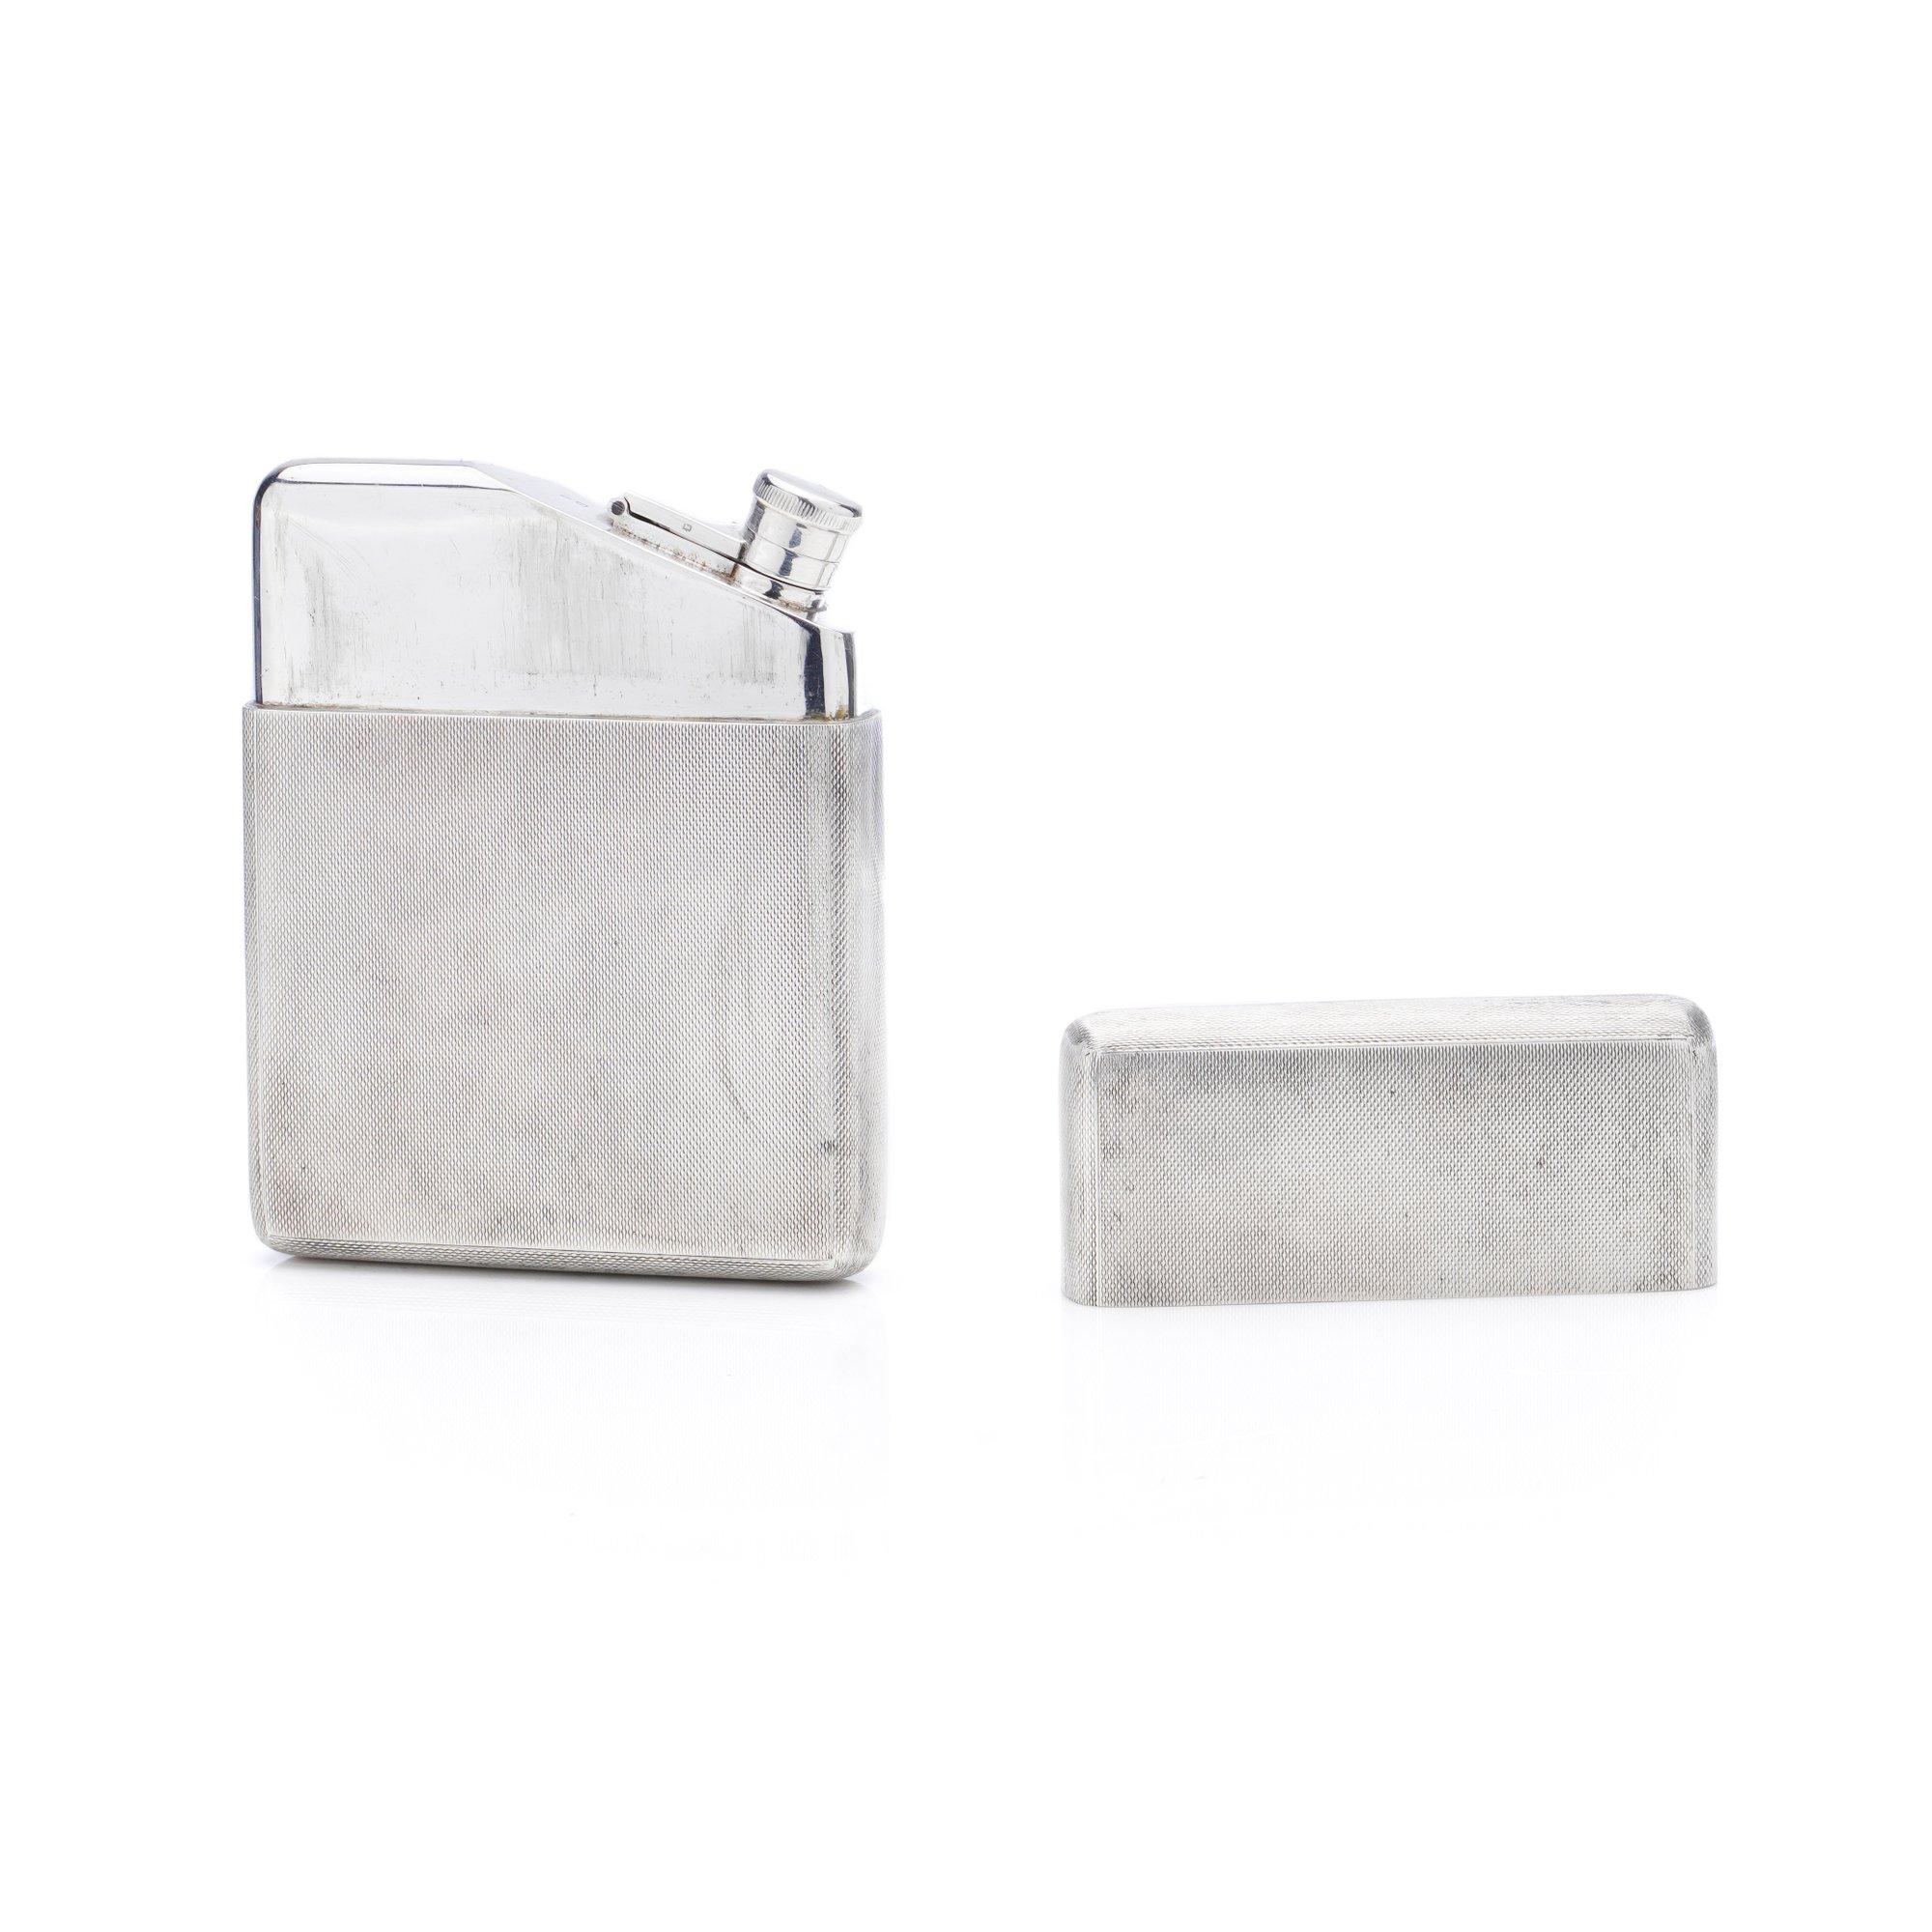 Vintage sterling silver flask
Made in England Birmingham 1948
Maker: A Wilcox
Fully hallmarked.

Dimensions - 
Size: 11.2 x 8.5 x 2 cm
Weight: 232 grams

Condition: Pre-owned, minor signs of usage, good condition overall. 